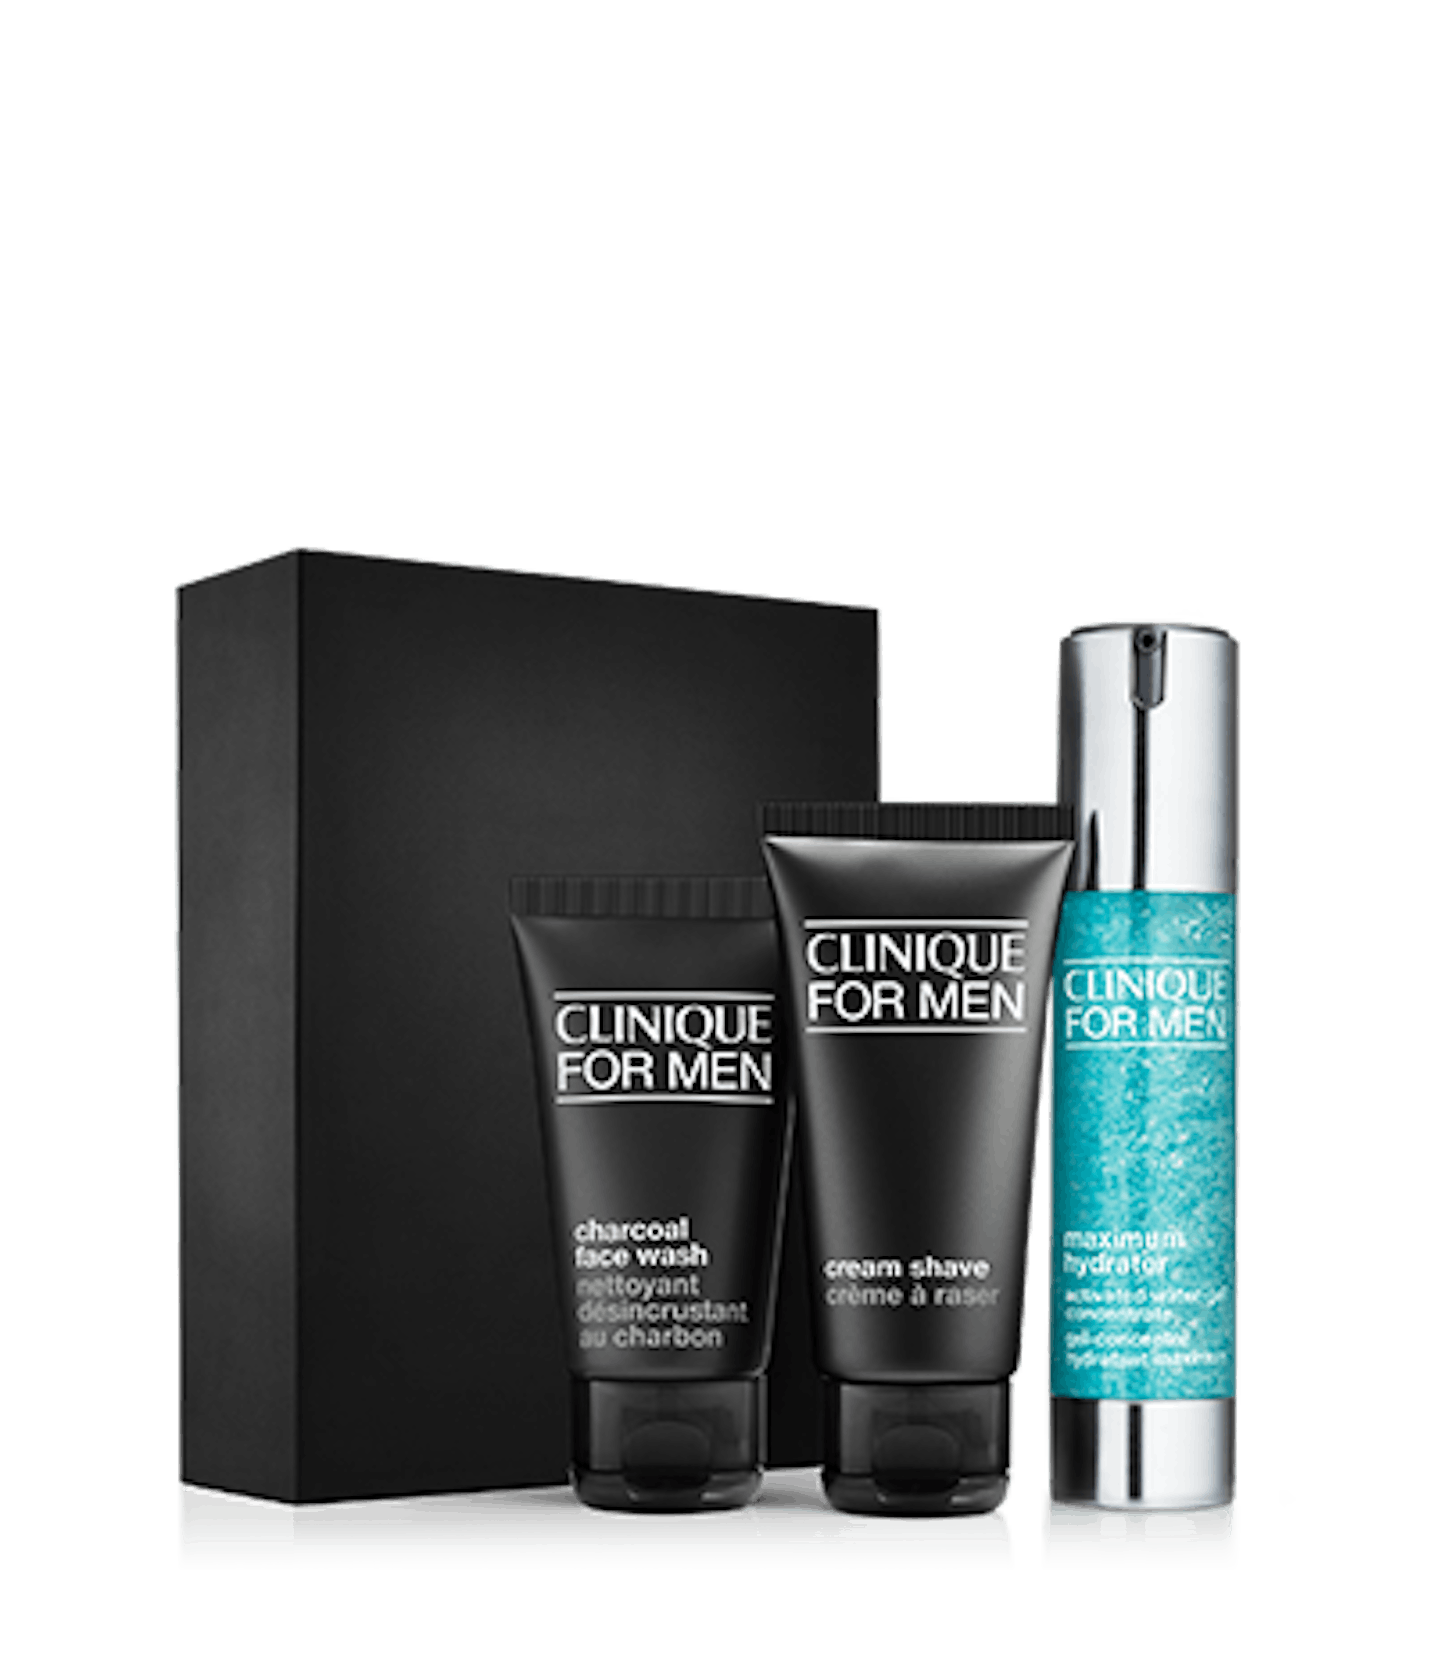 15) Grooming Set, £36, Clinique